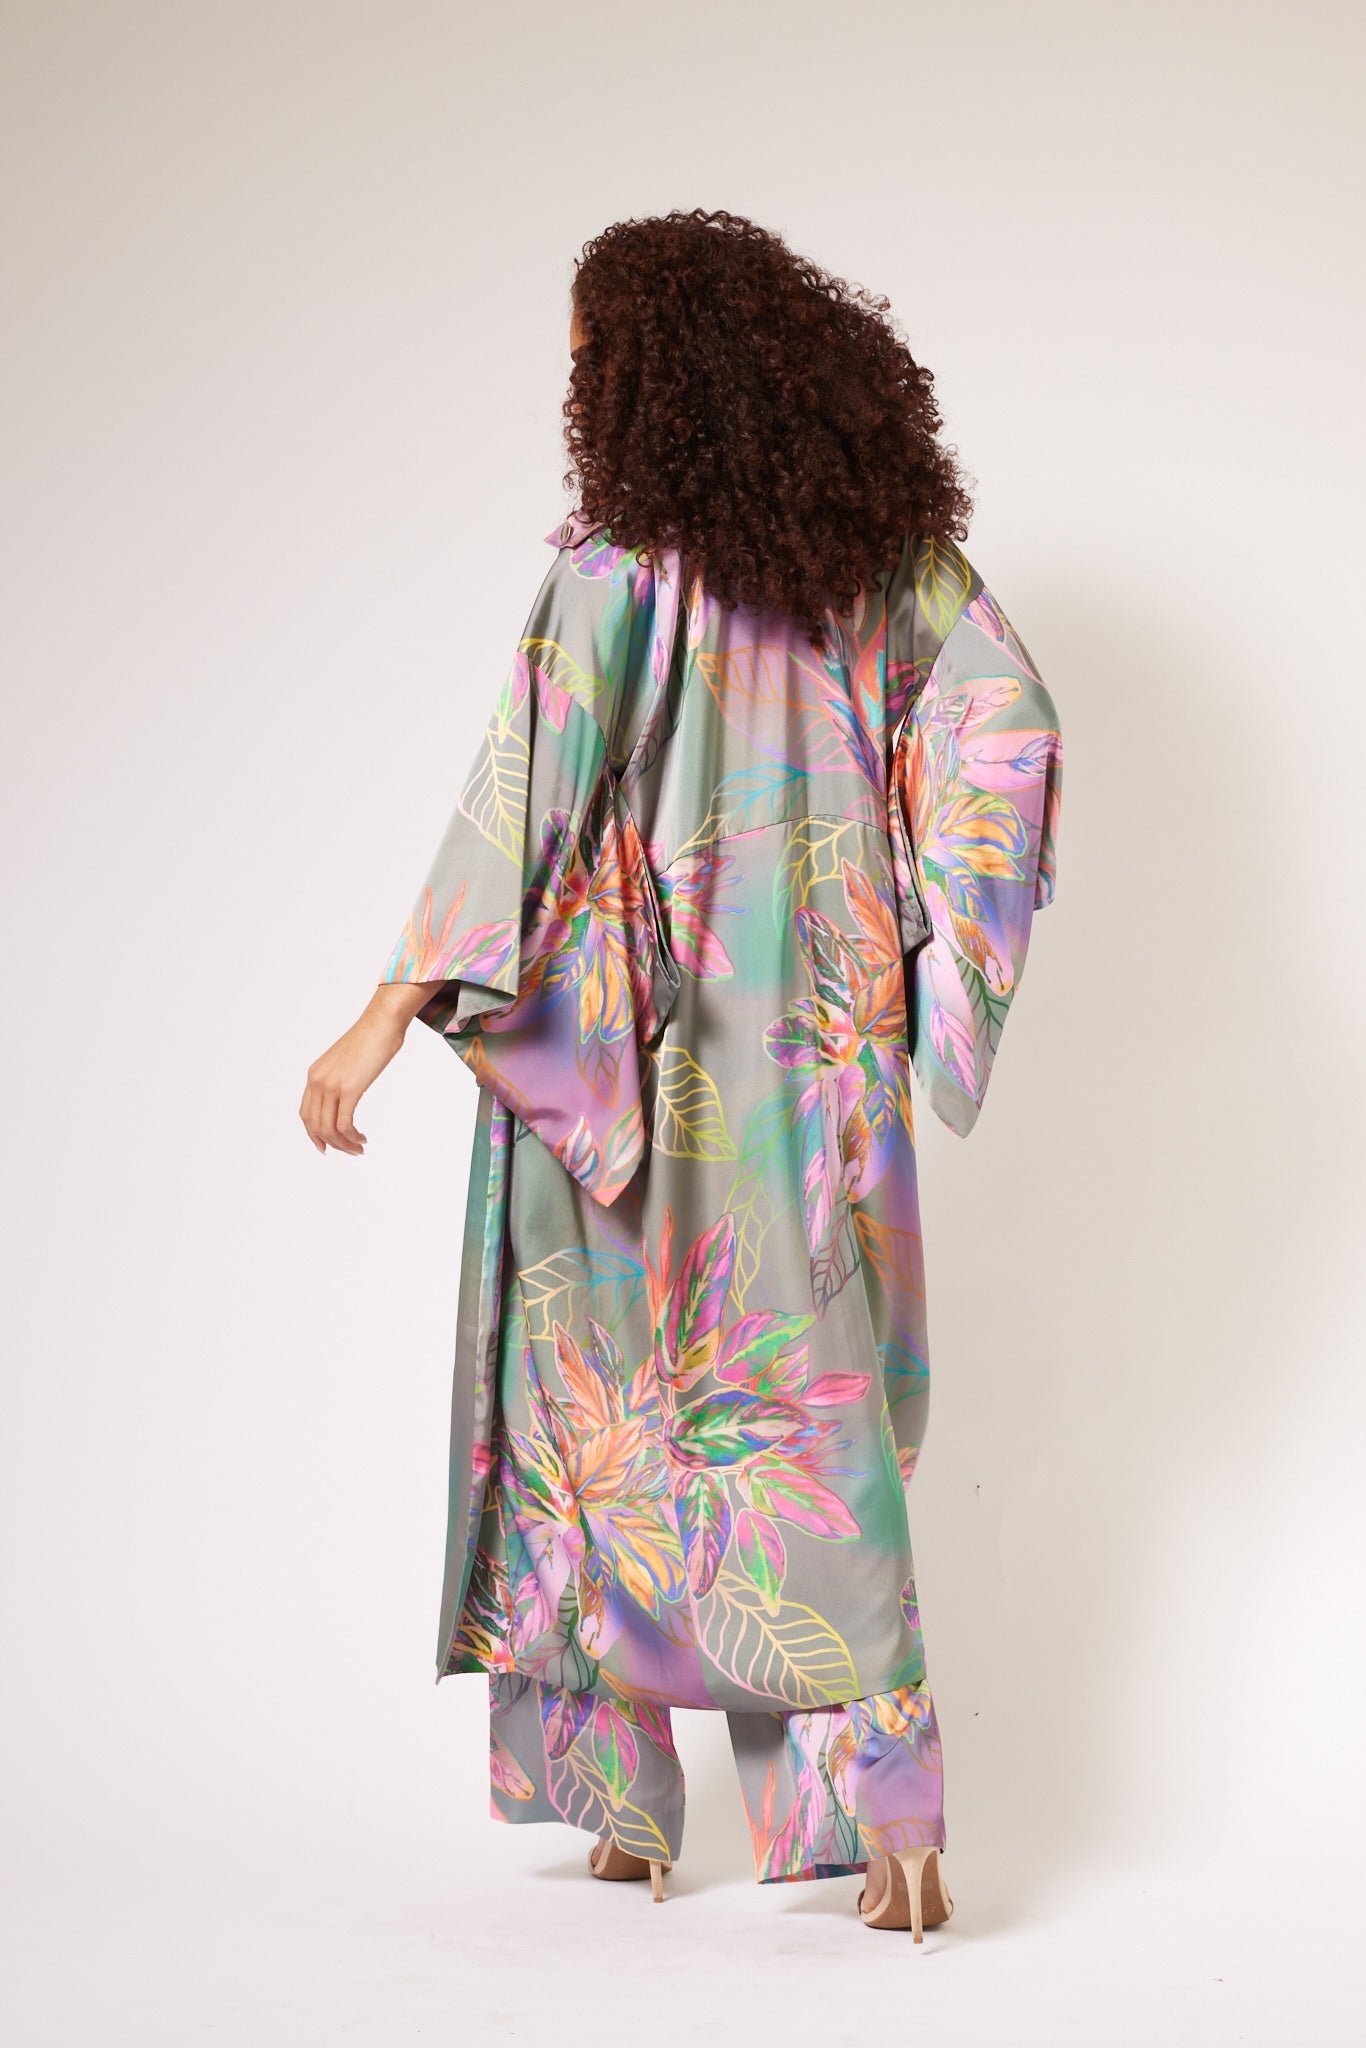 back profile of woman modelling all over multicolored tropical print kimono duster and matching yacht slacks made with recycled textiles 2